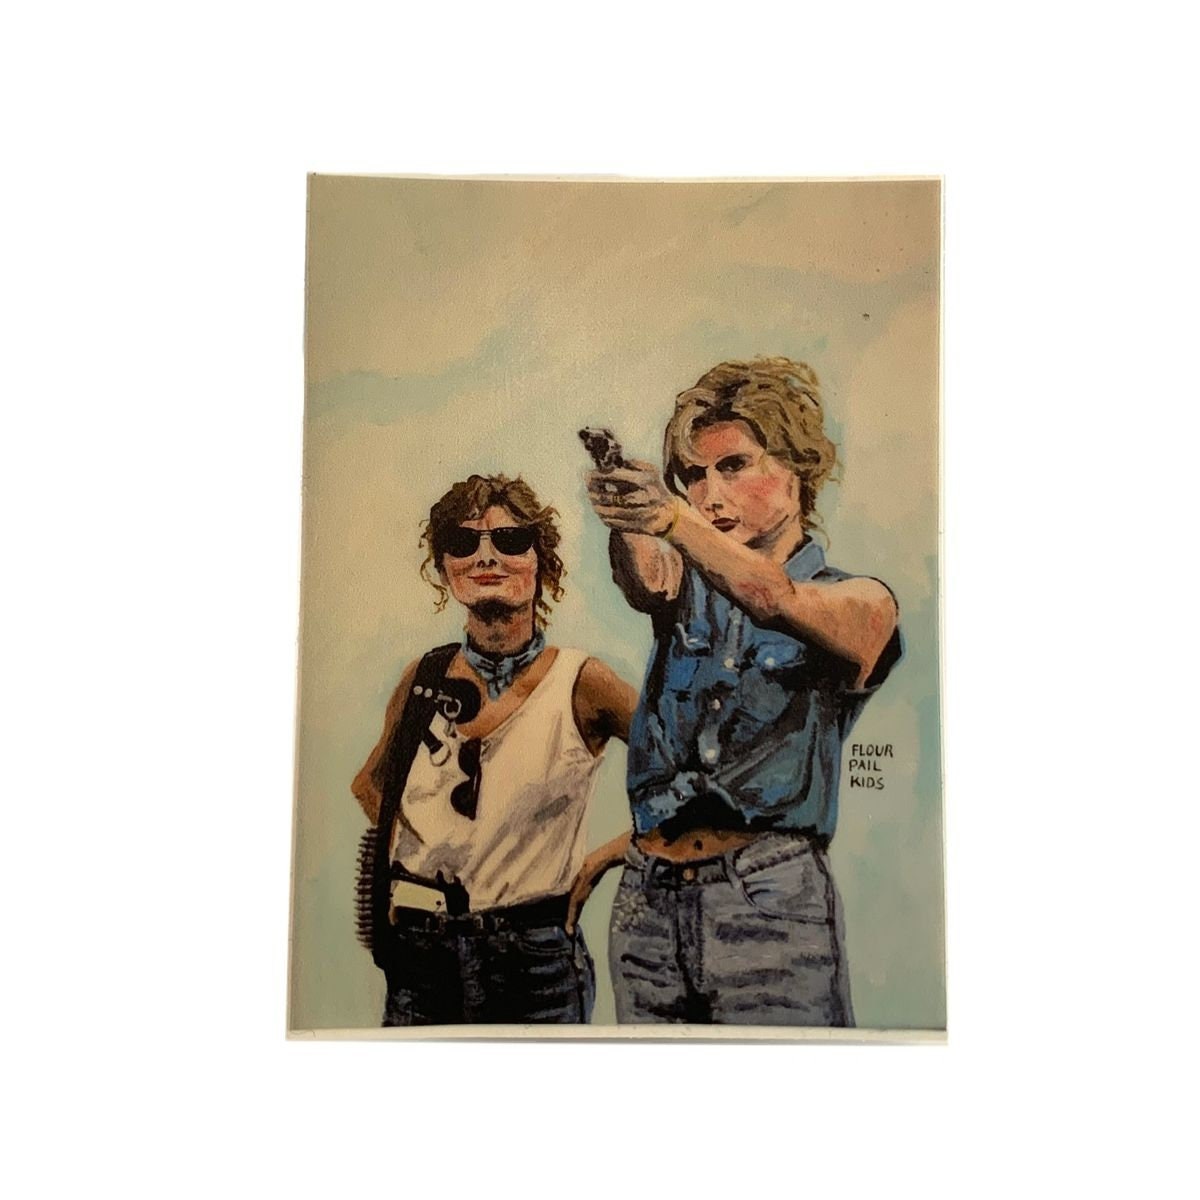 THELMA AND LOUISE STICKER - Junk GYpSy co.